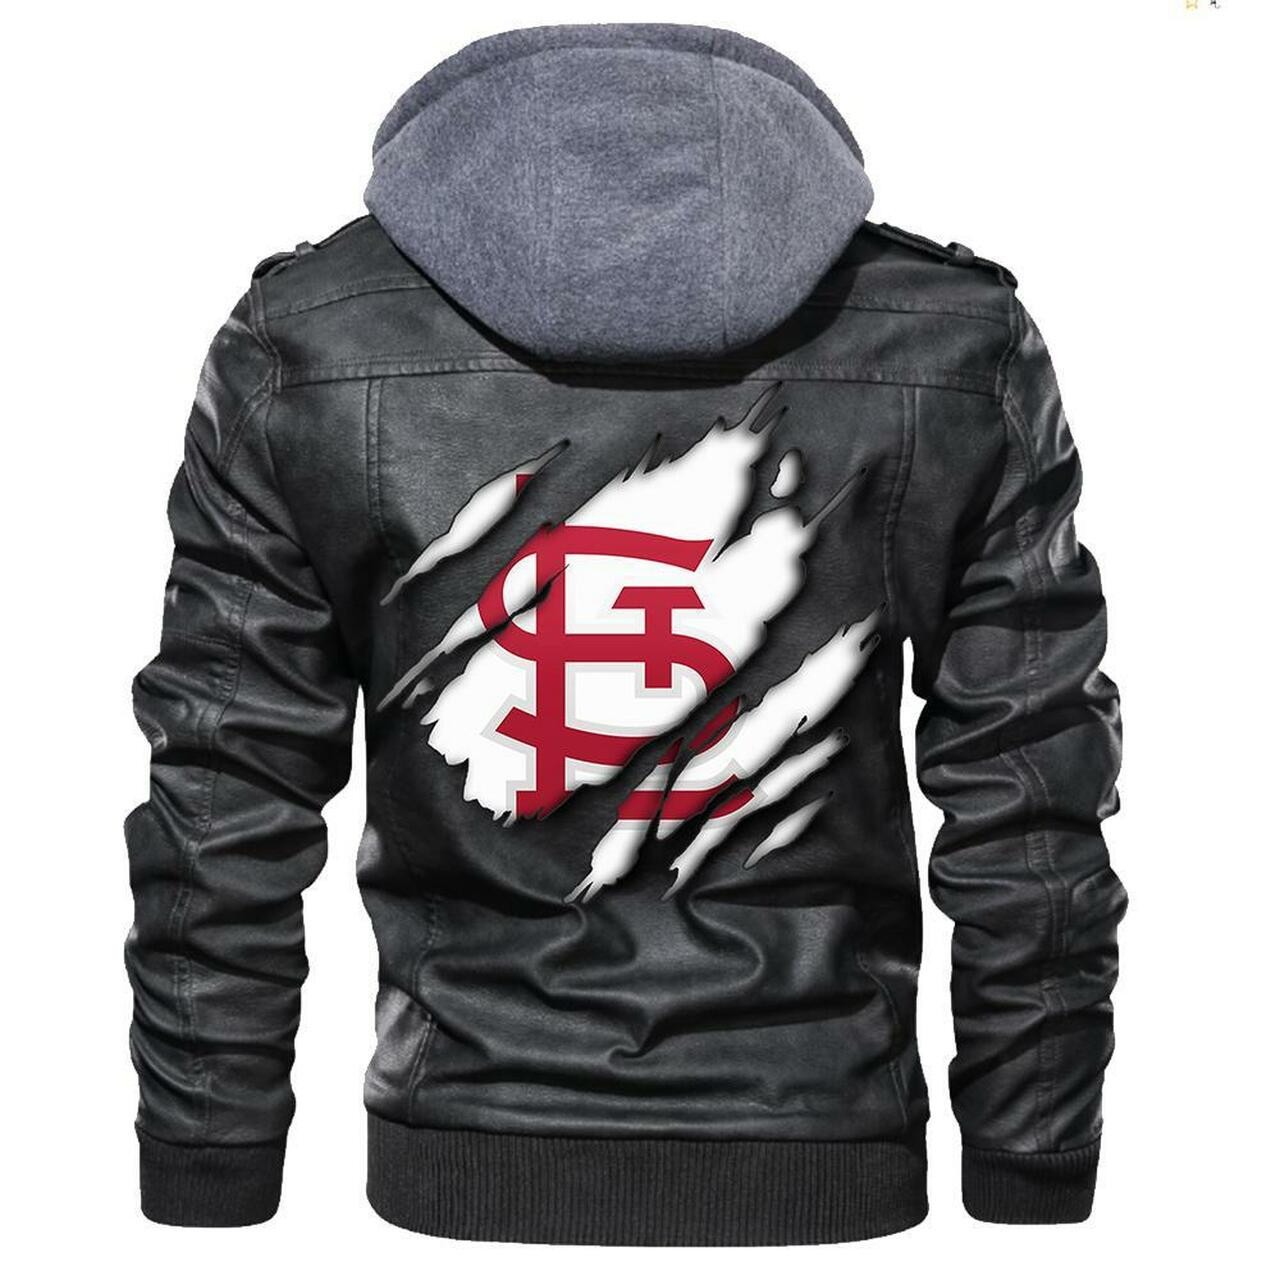 This leather Jacket will look great on you and make you stand out from the crowd 393